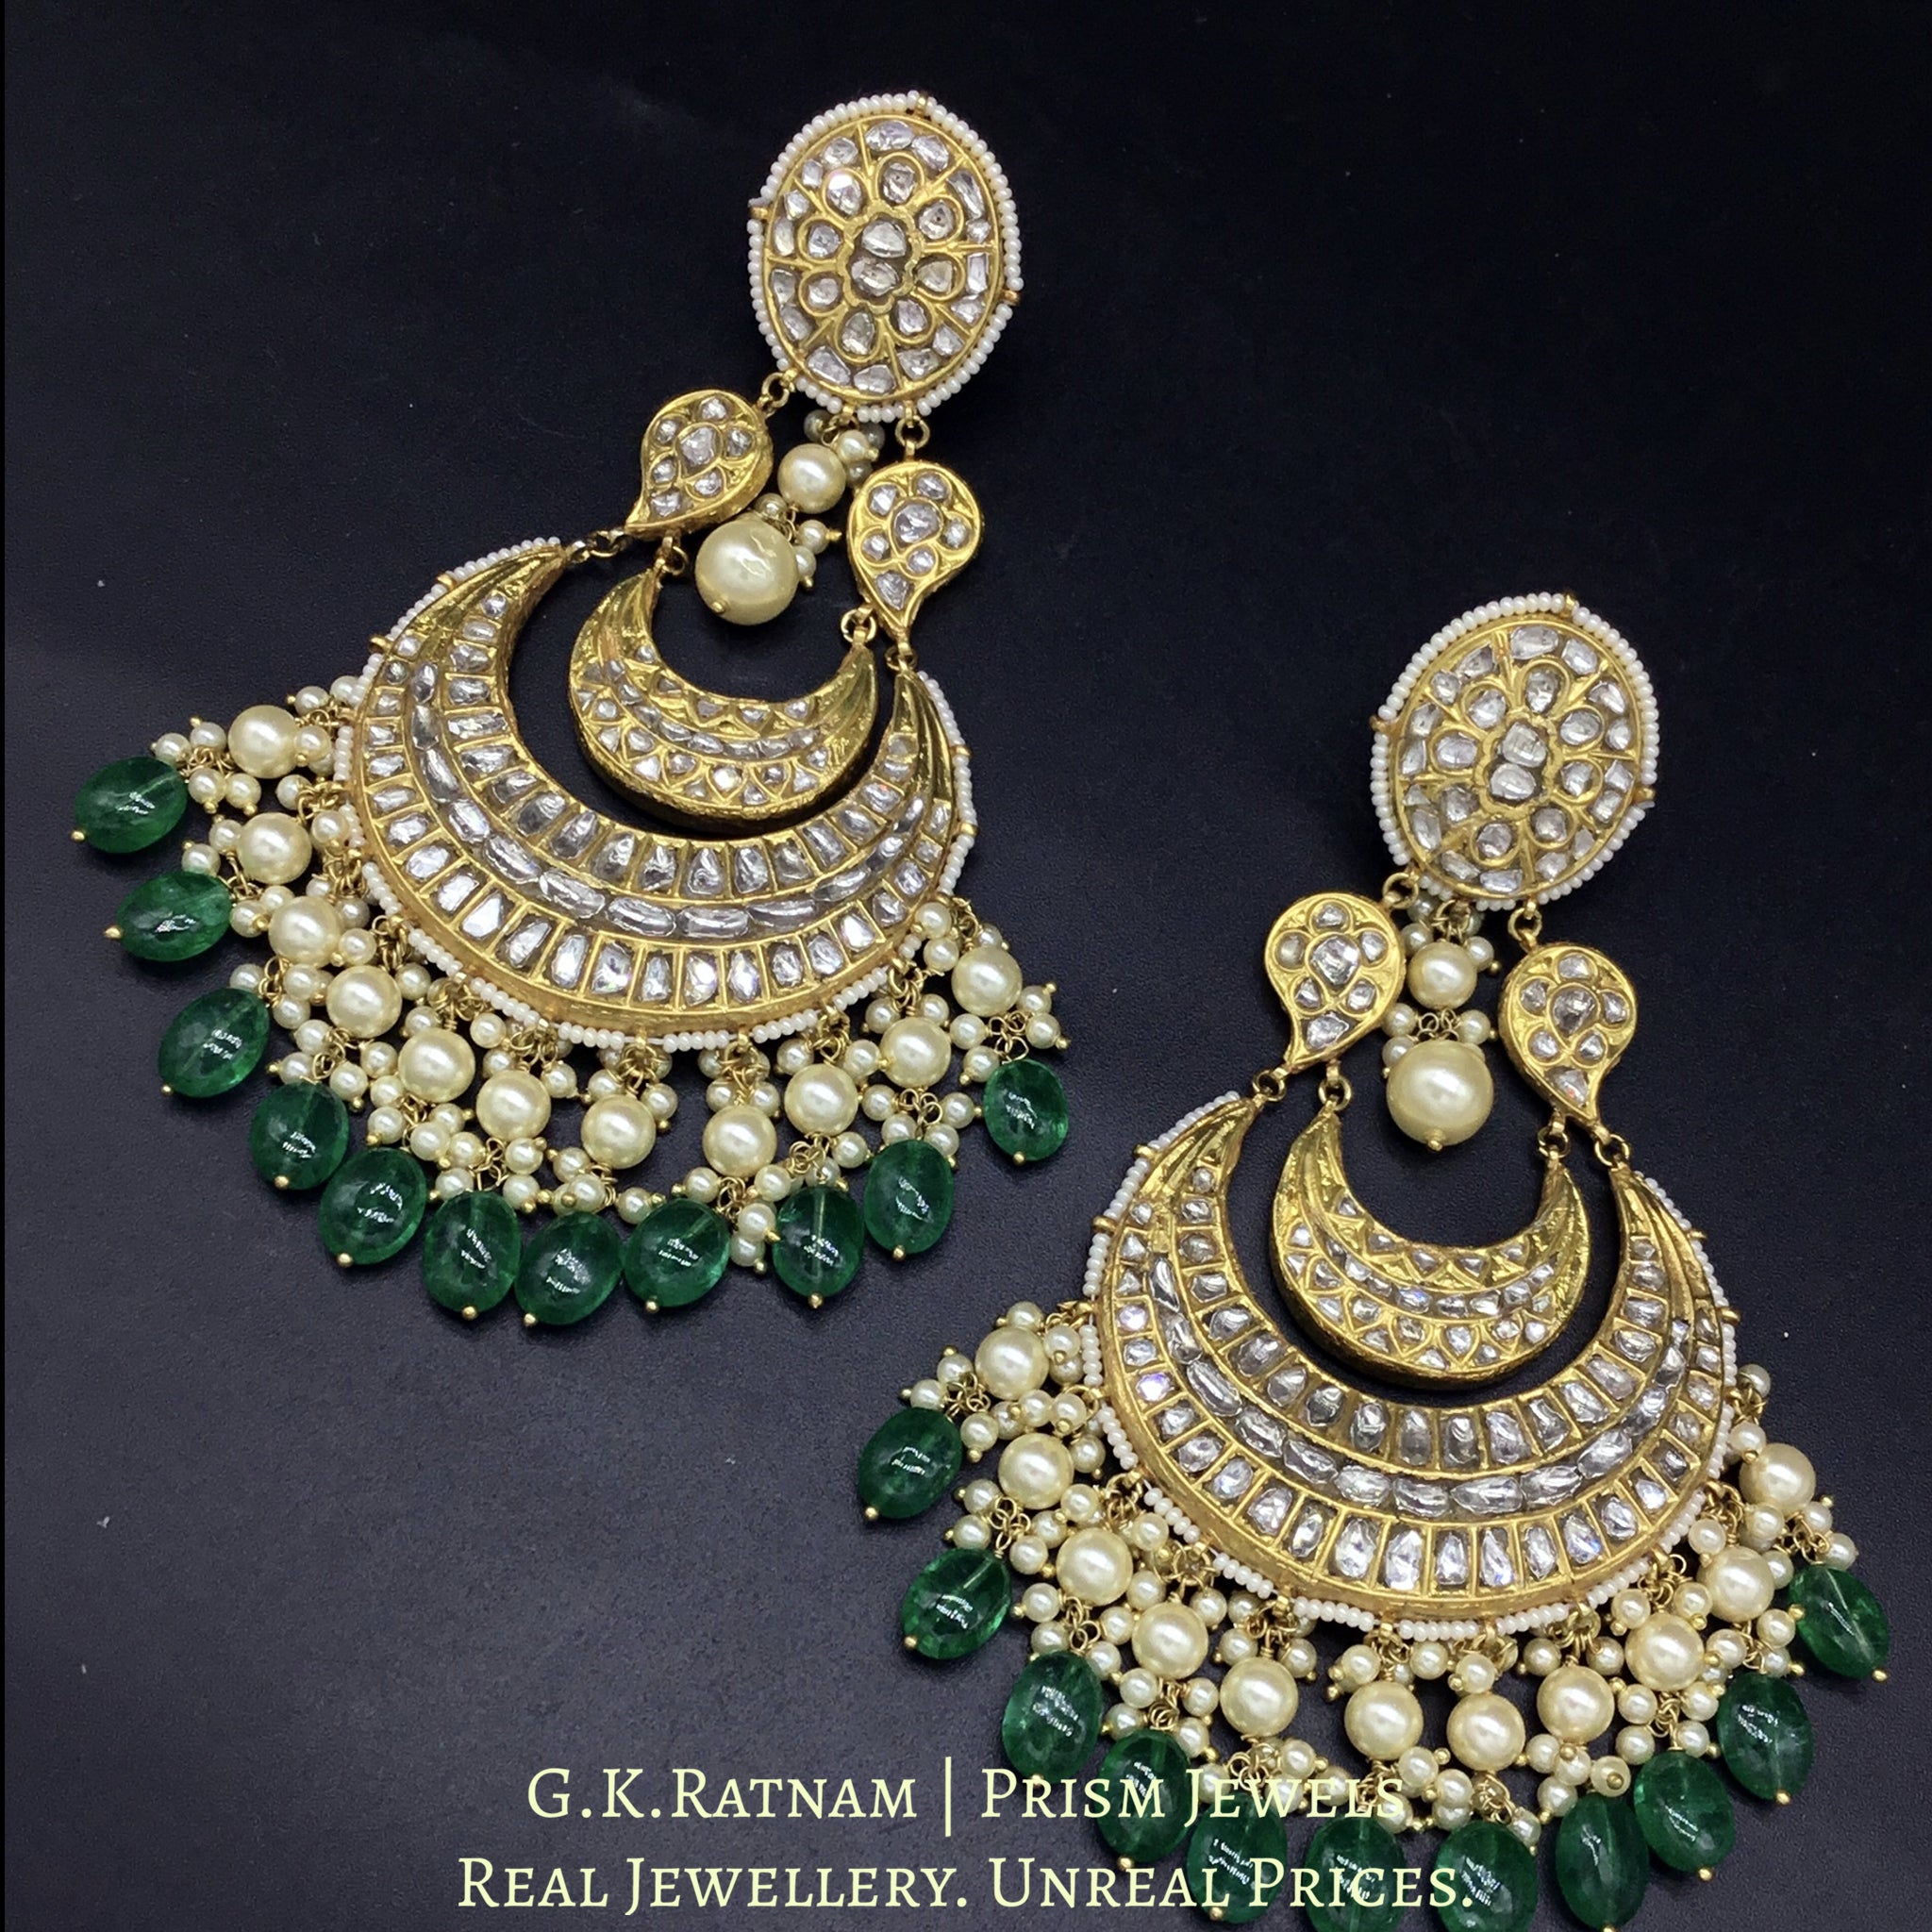 23k Gold and Diamond Polki Chand Bali Earring Pair with Pearls and emerald-grade Beryls